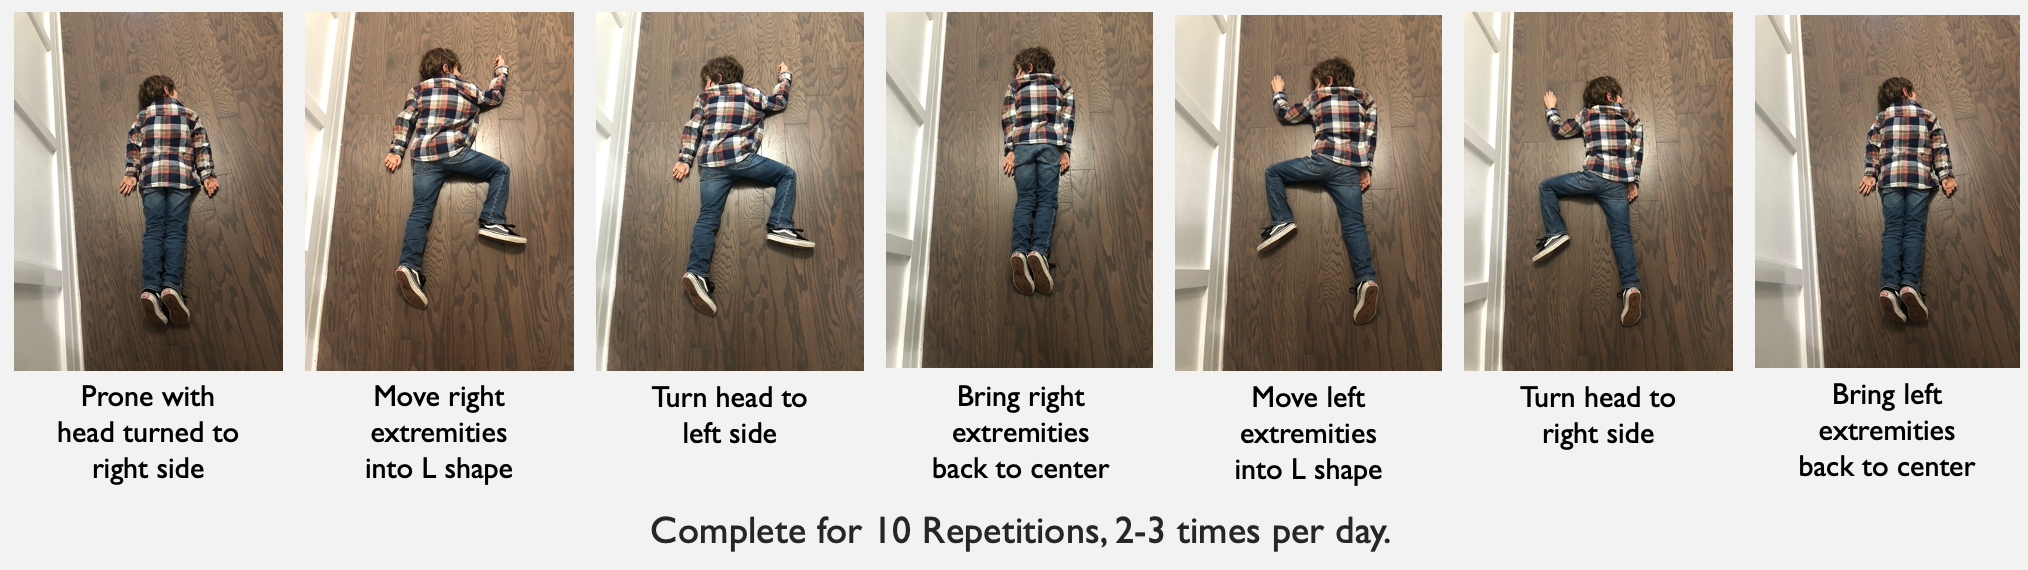 Series of 7 exercises in a prone position for ATNR